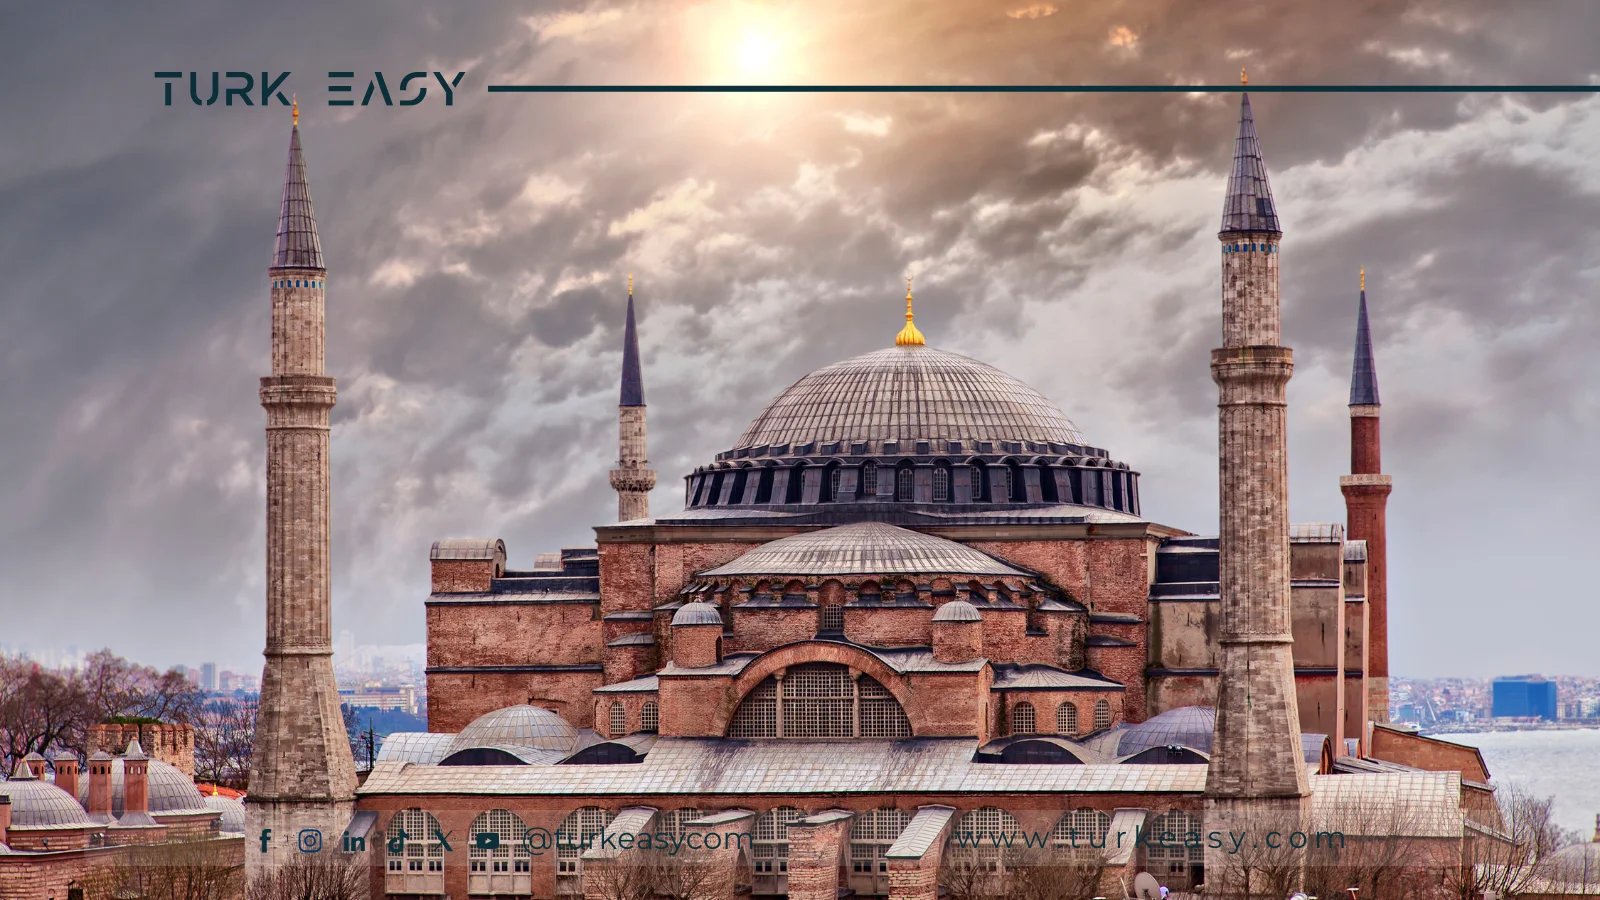 Details about Ayasofya Mosque in Istanbul